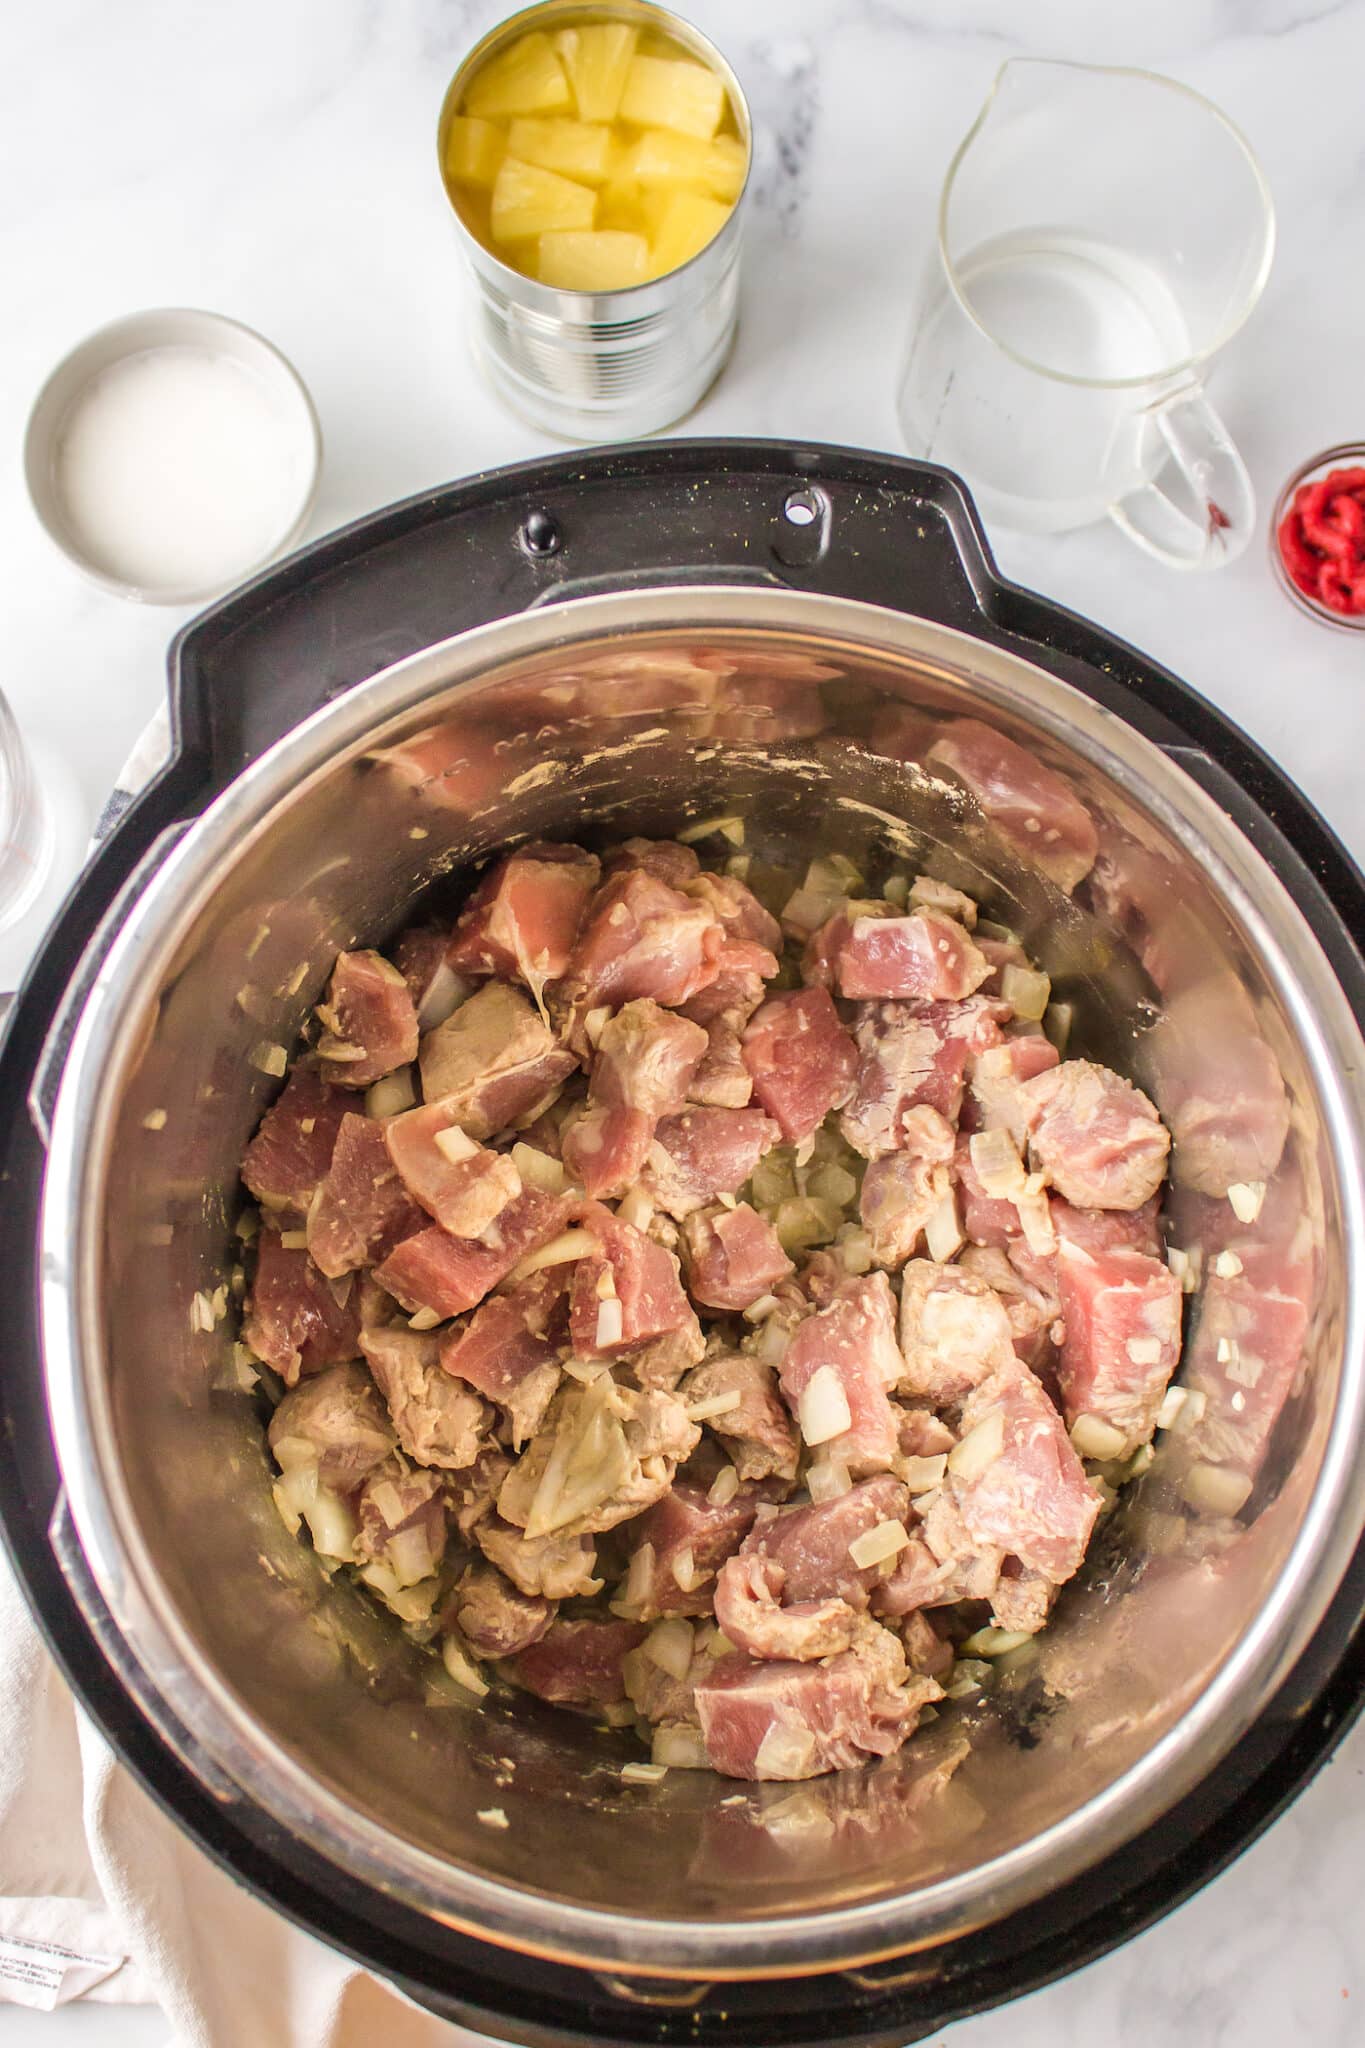 Pork cubes being browned in the liner of an Instant Pot.